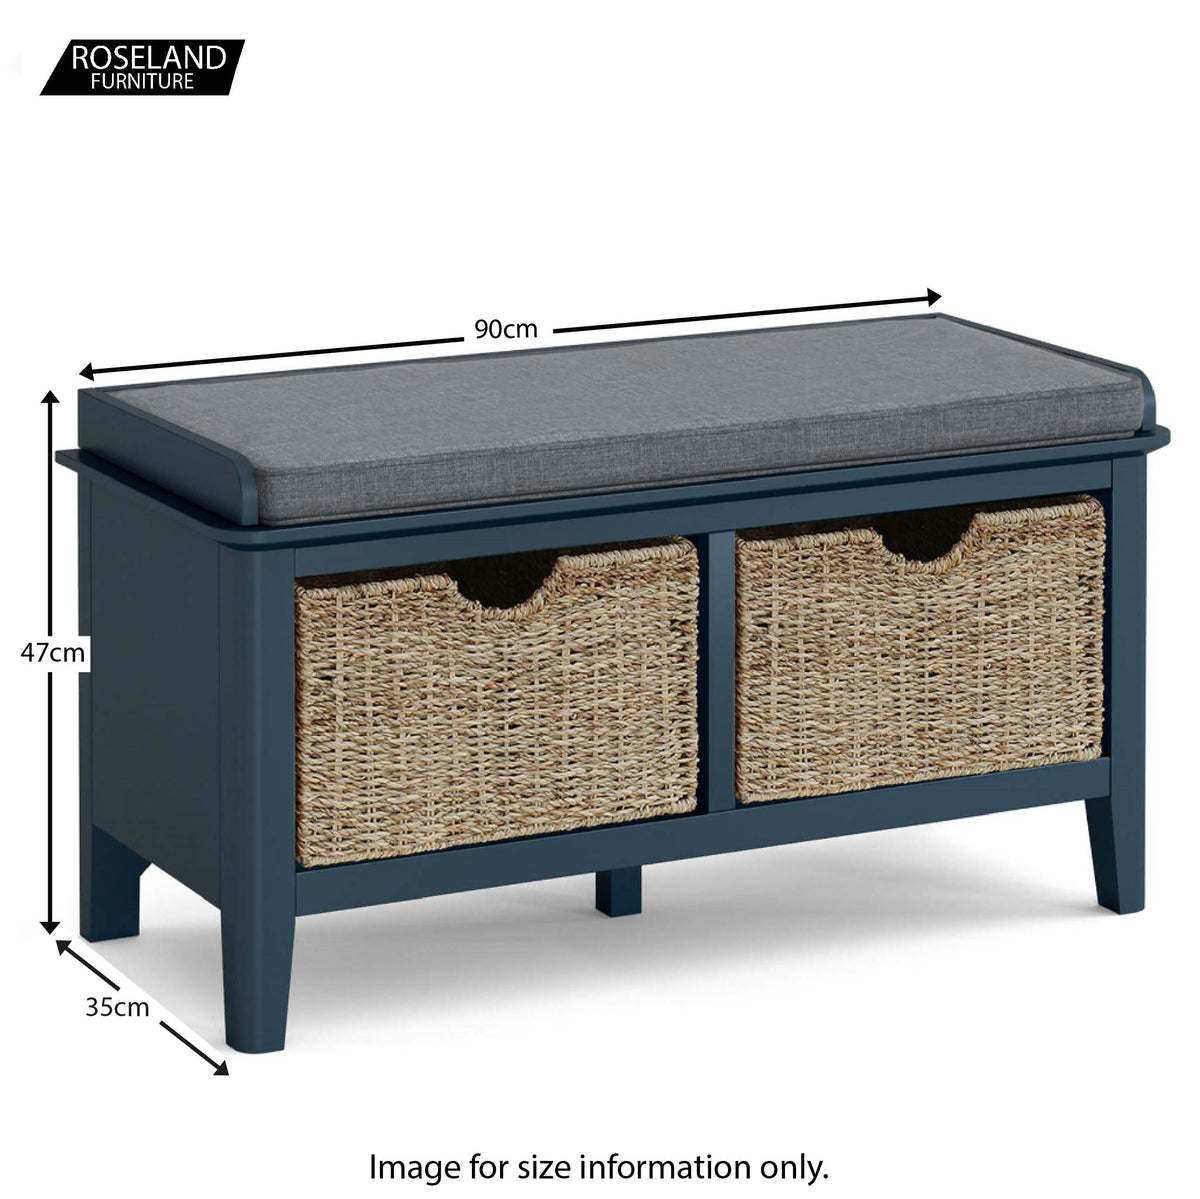 Stirling Blue Storage Bench size guide